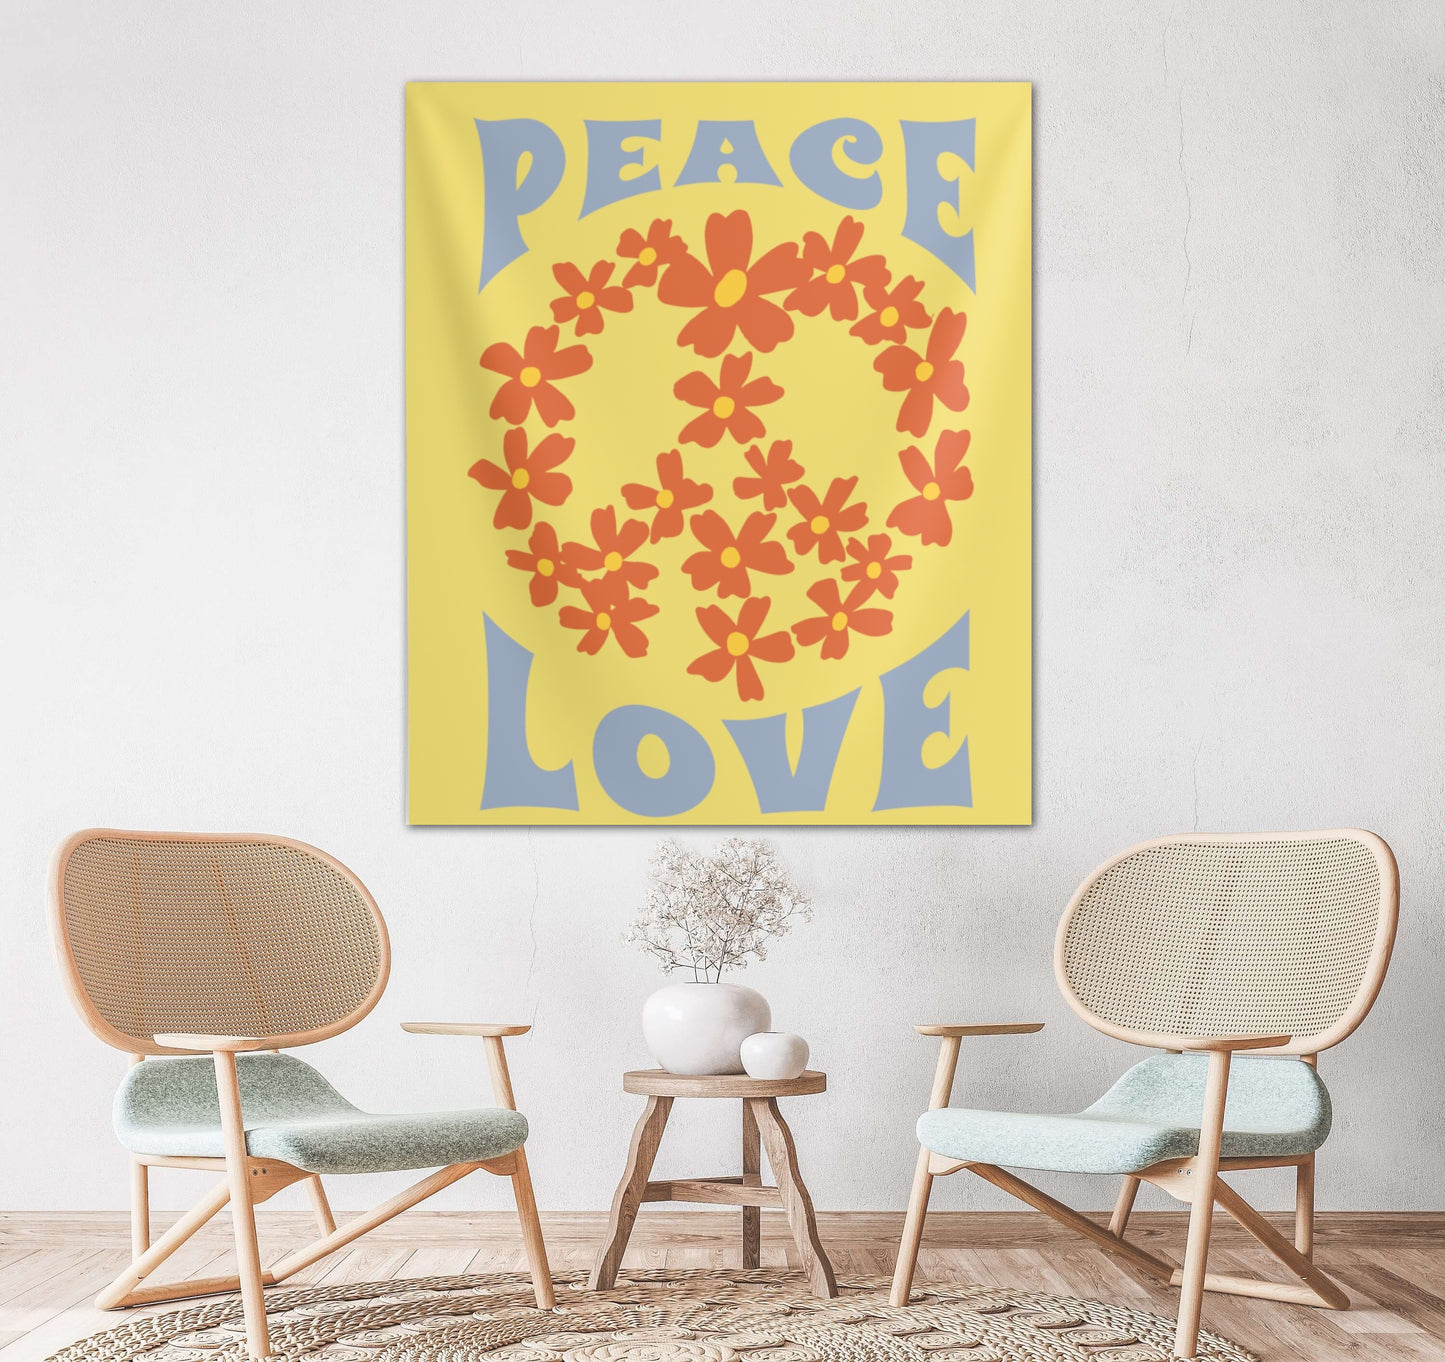 Yellow Peace Sign Tapestry